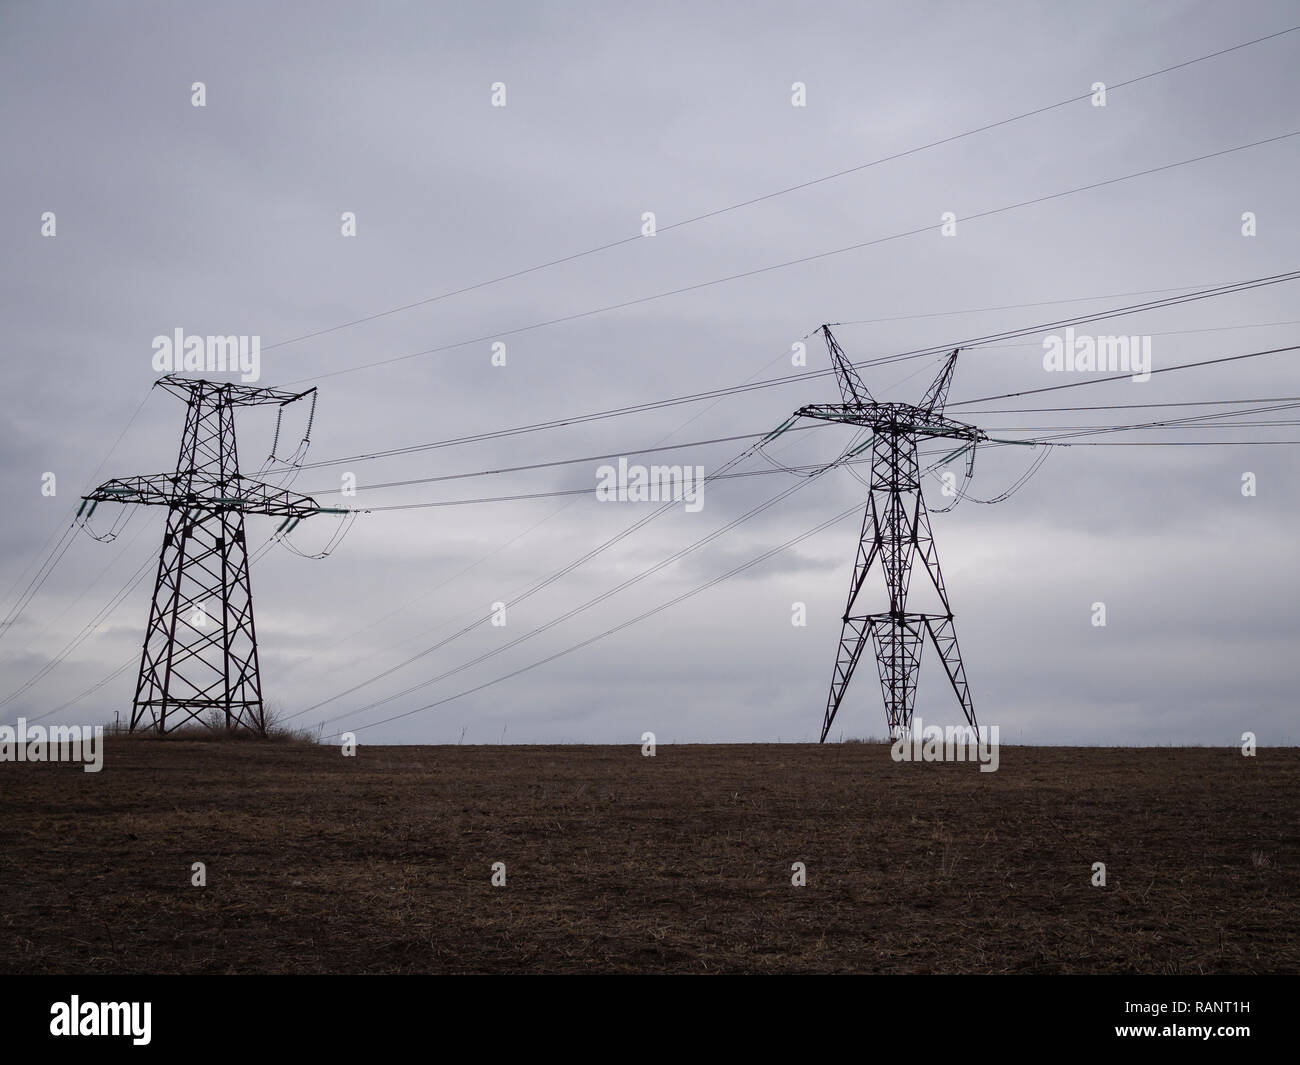 Overhead power line towers in cloudy day Stock Photo